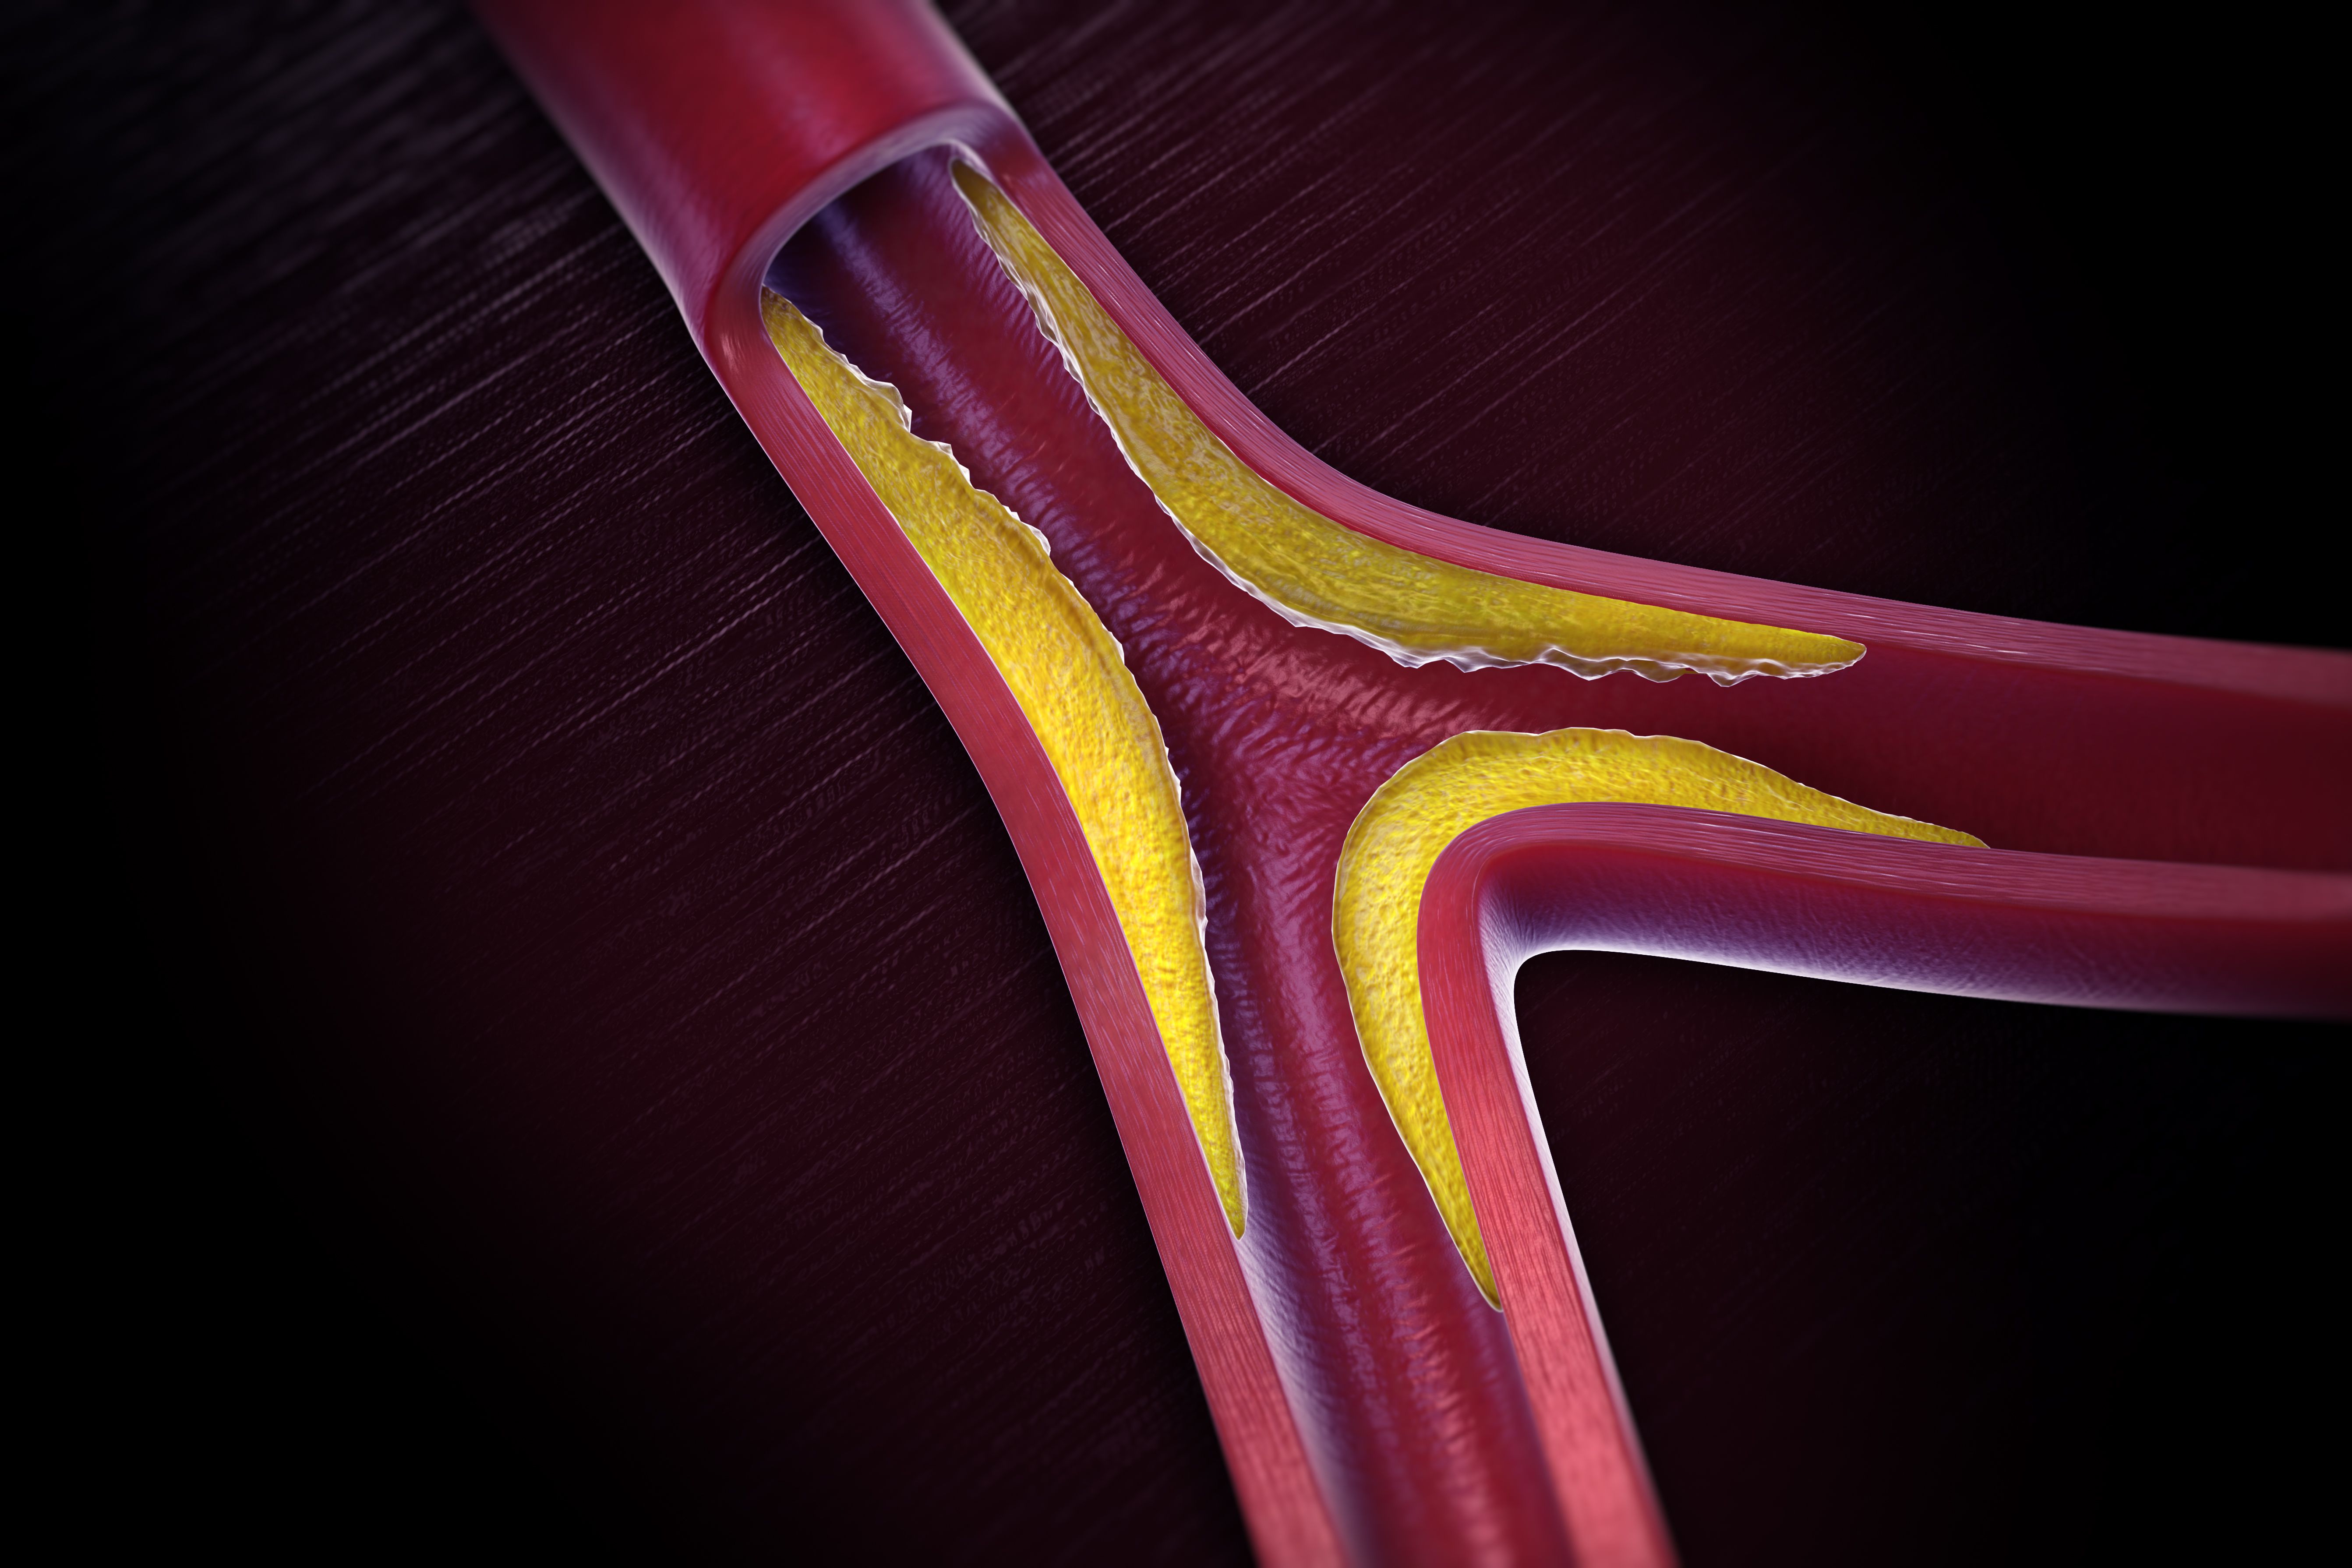 What you have to know about Peripheral Artery Disease?